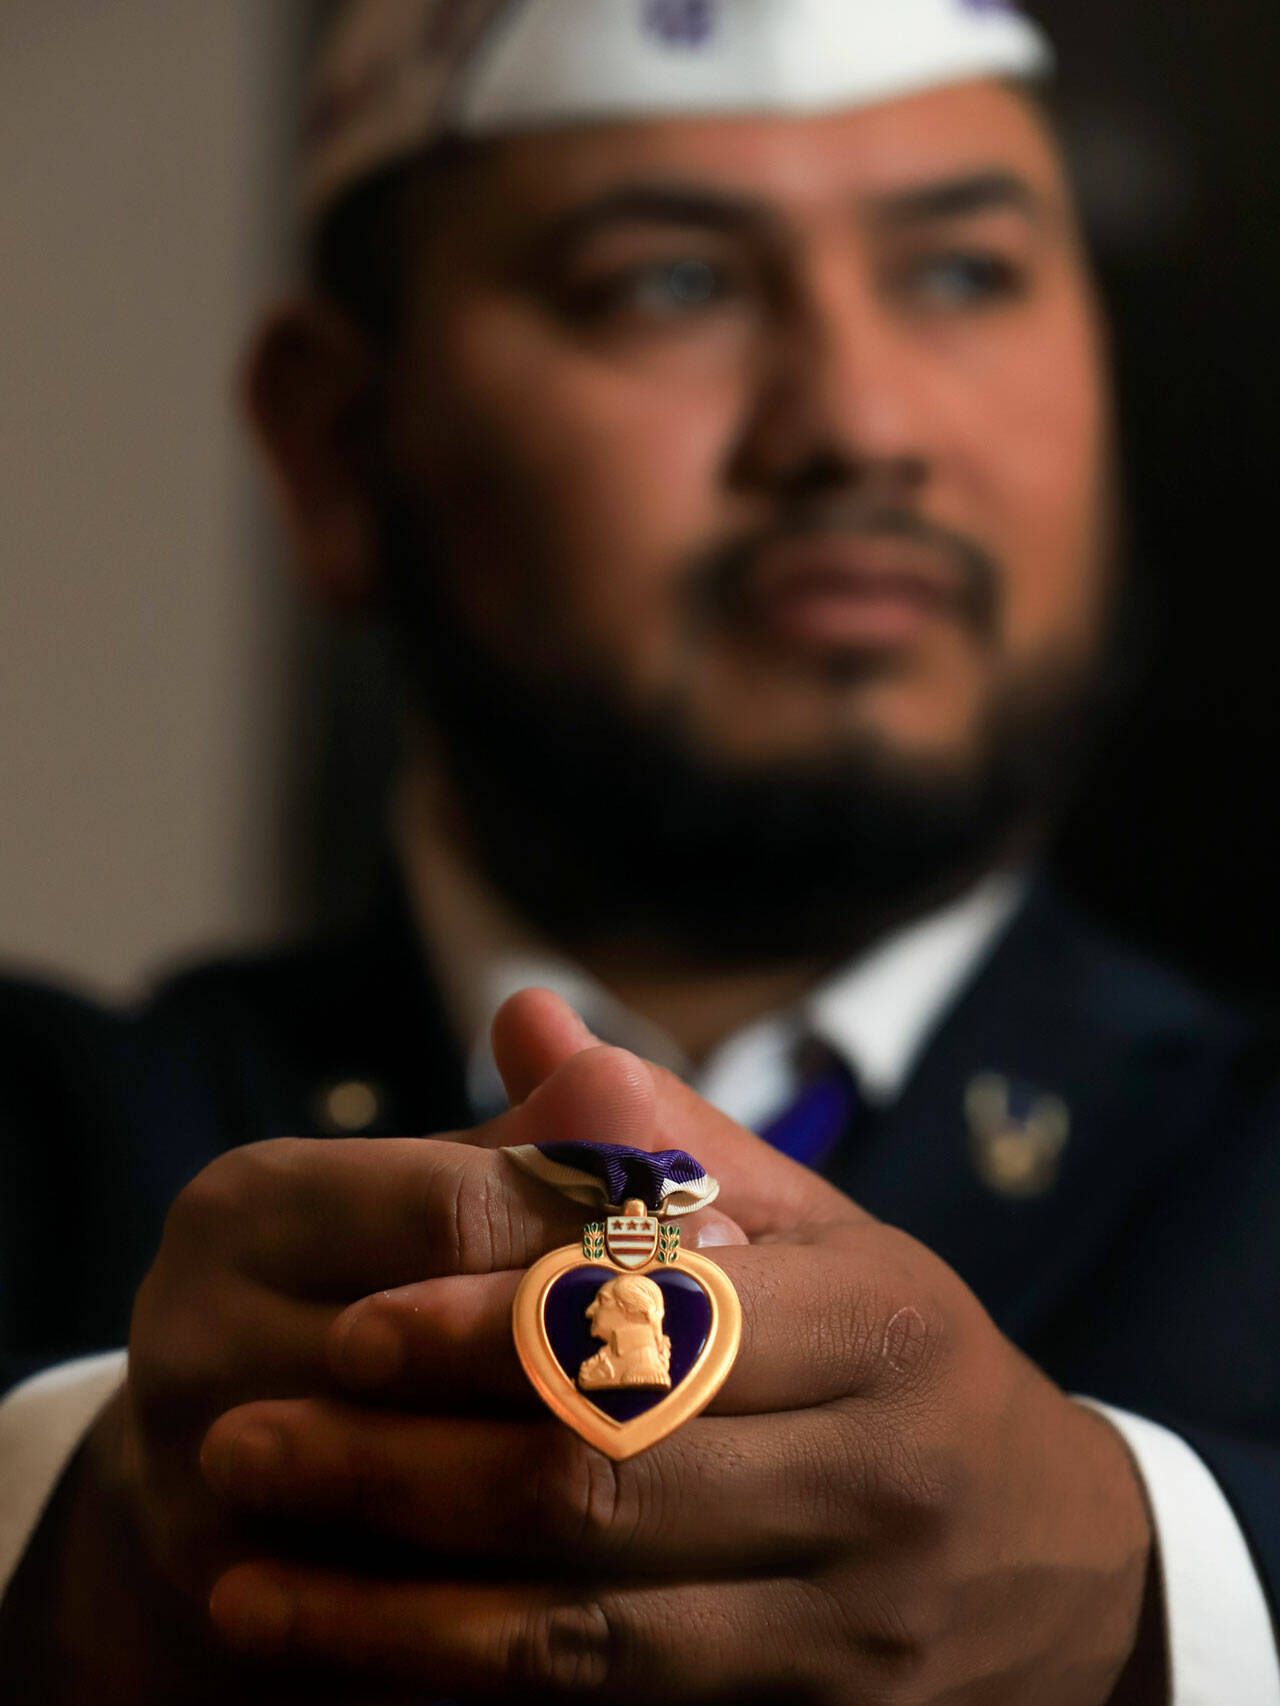 Retired Marine Robert Olivarez received his Purple Heart after five tours in Iraq and helped get Snohomish County designated a Purple Heart County. (Kevin Clark / The Herald)